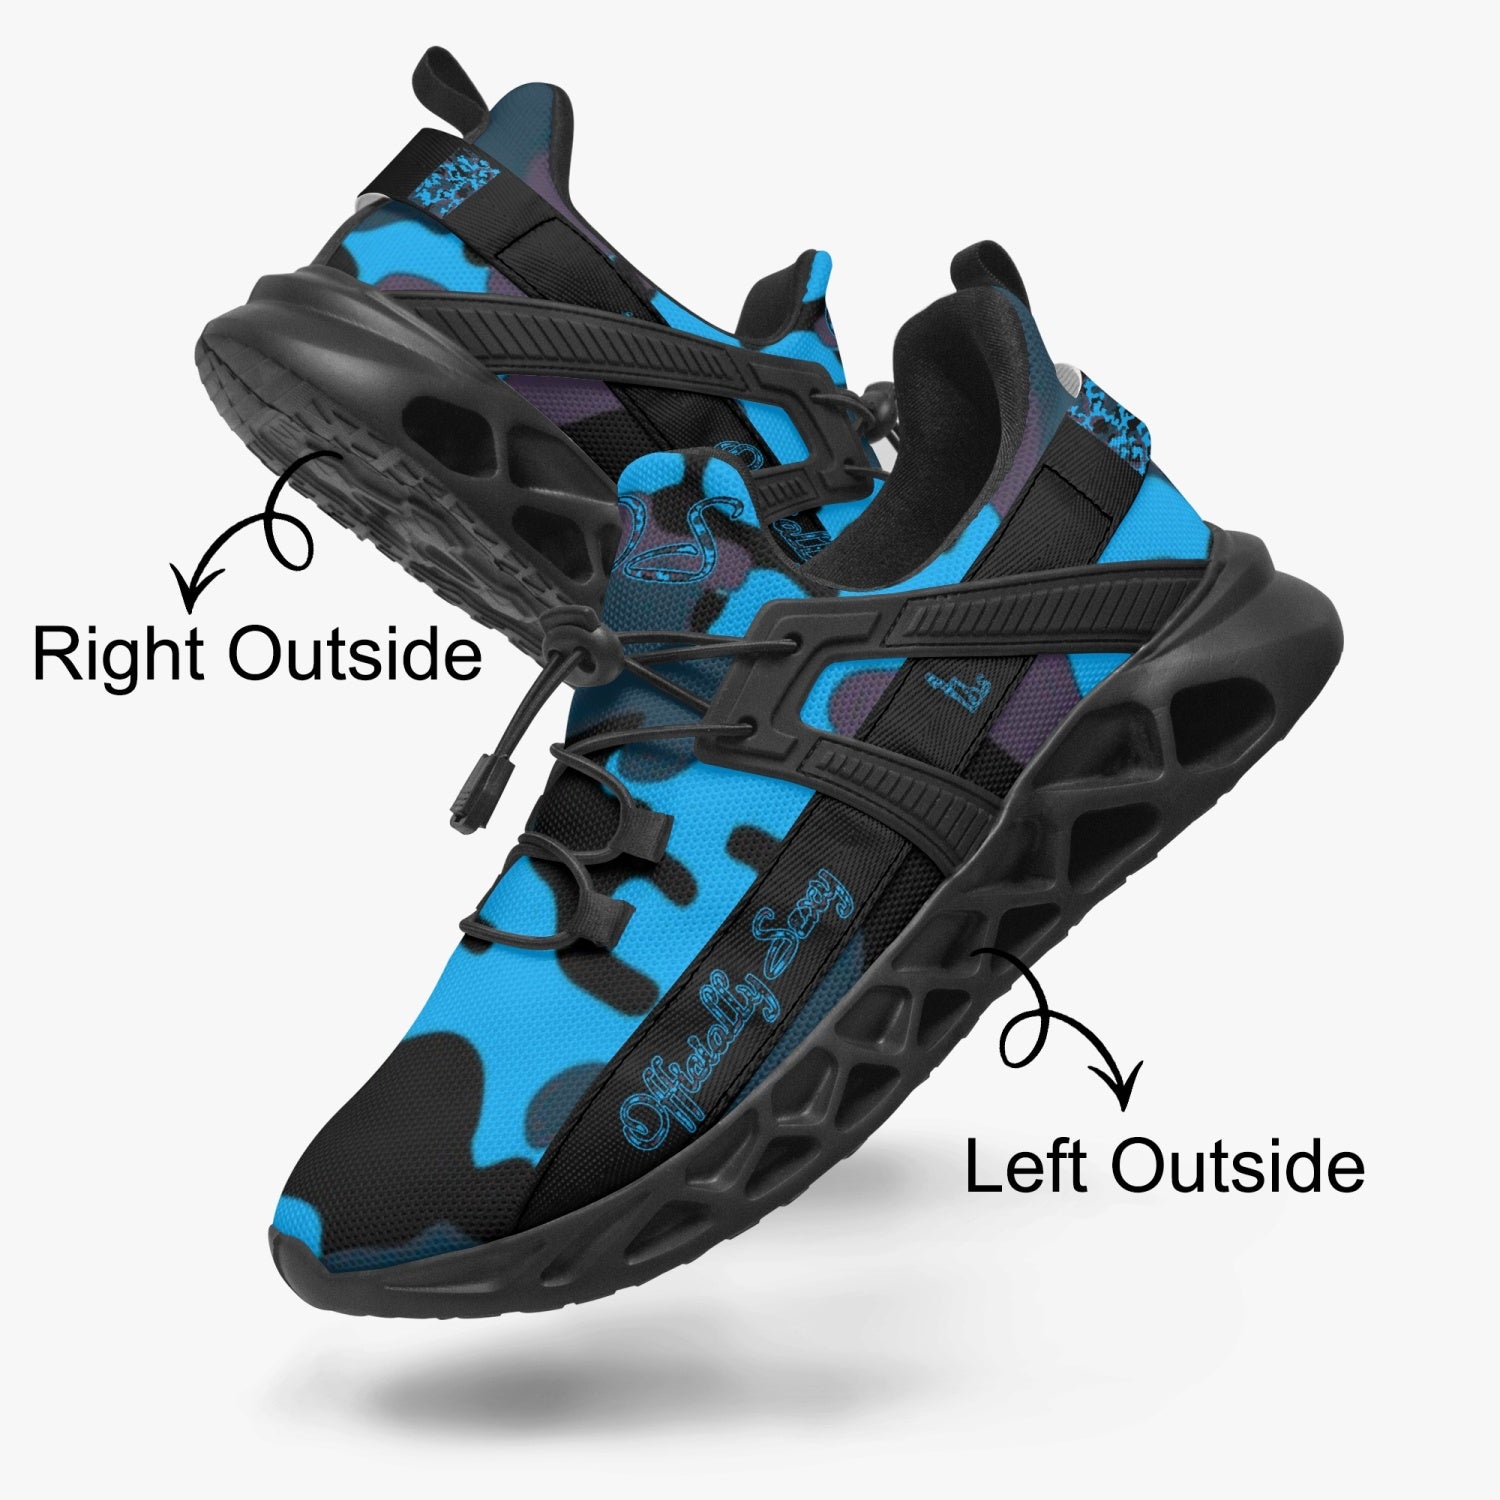 Officially Sexy Blue Army Camouflage Collection Mesh Running Shoes